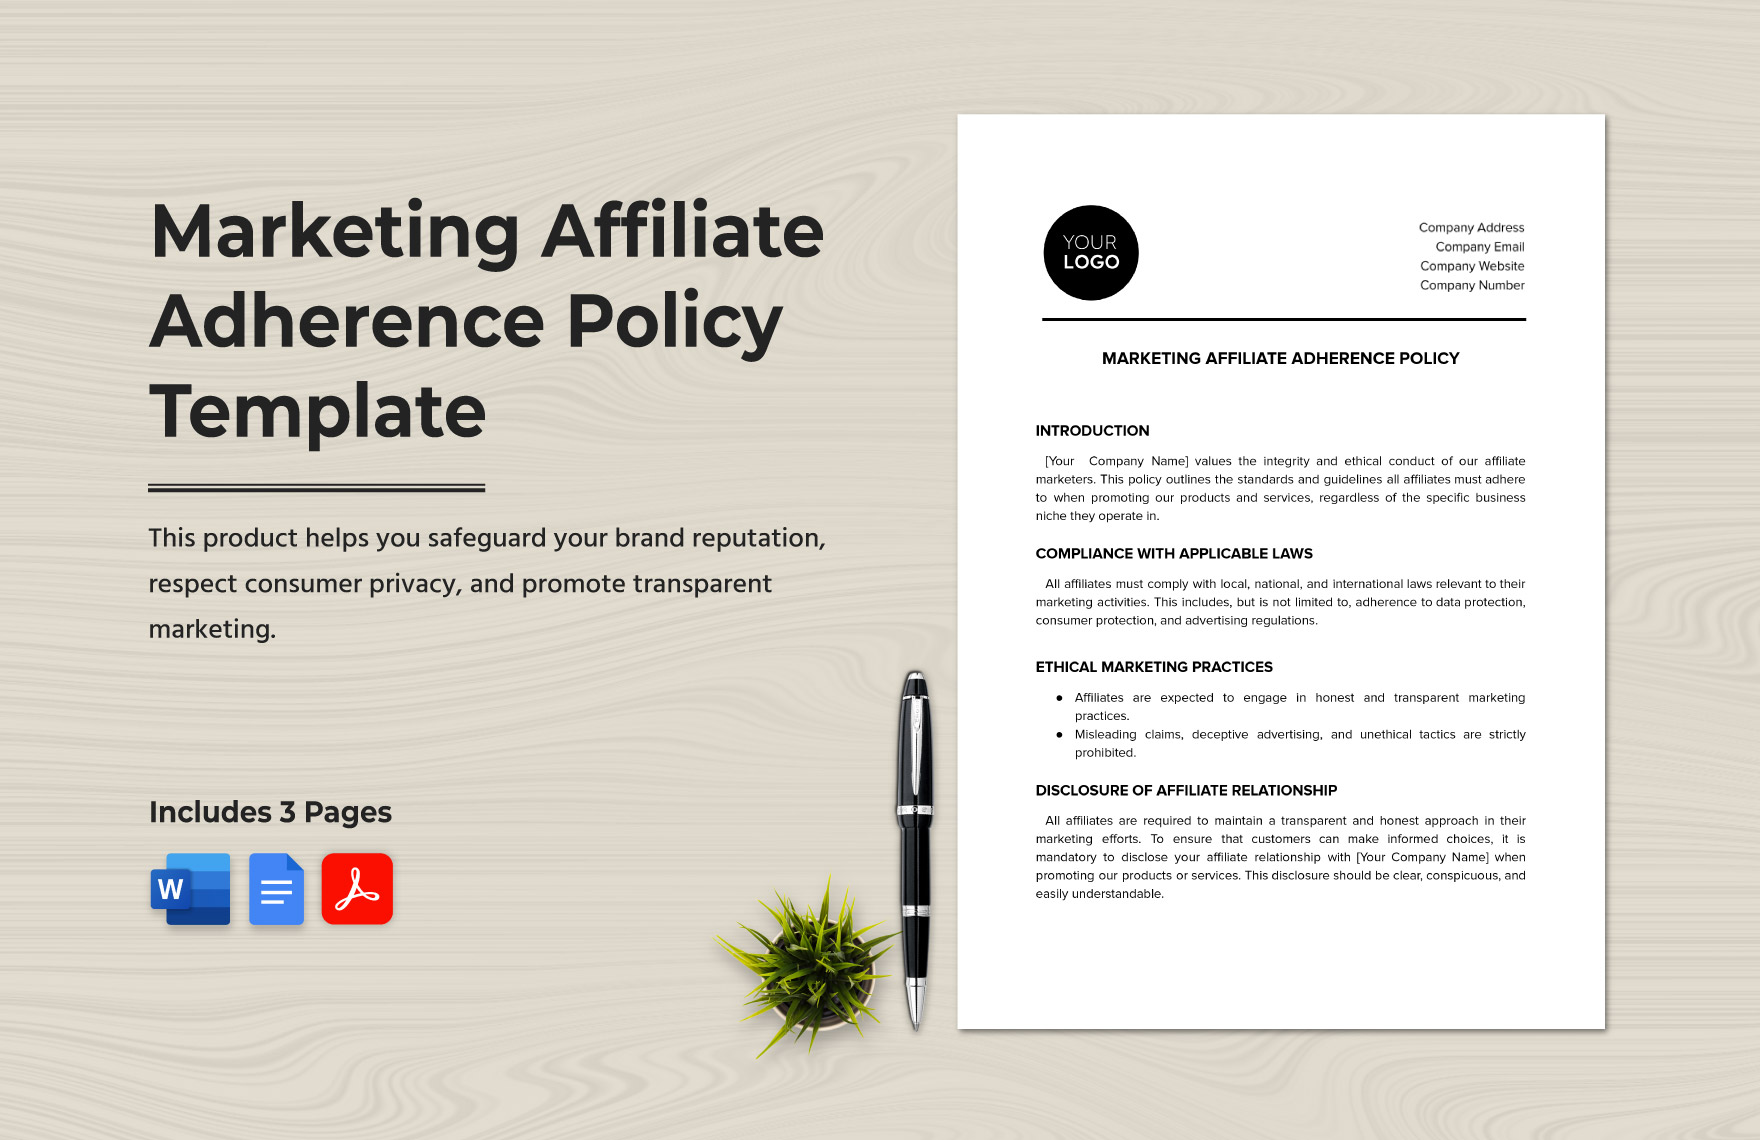 Marketing Affiliate Adherence Policy Template in Word, Google Docs, PDF